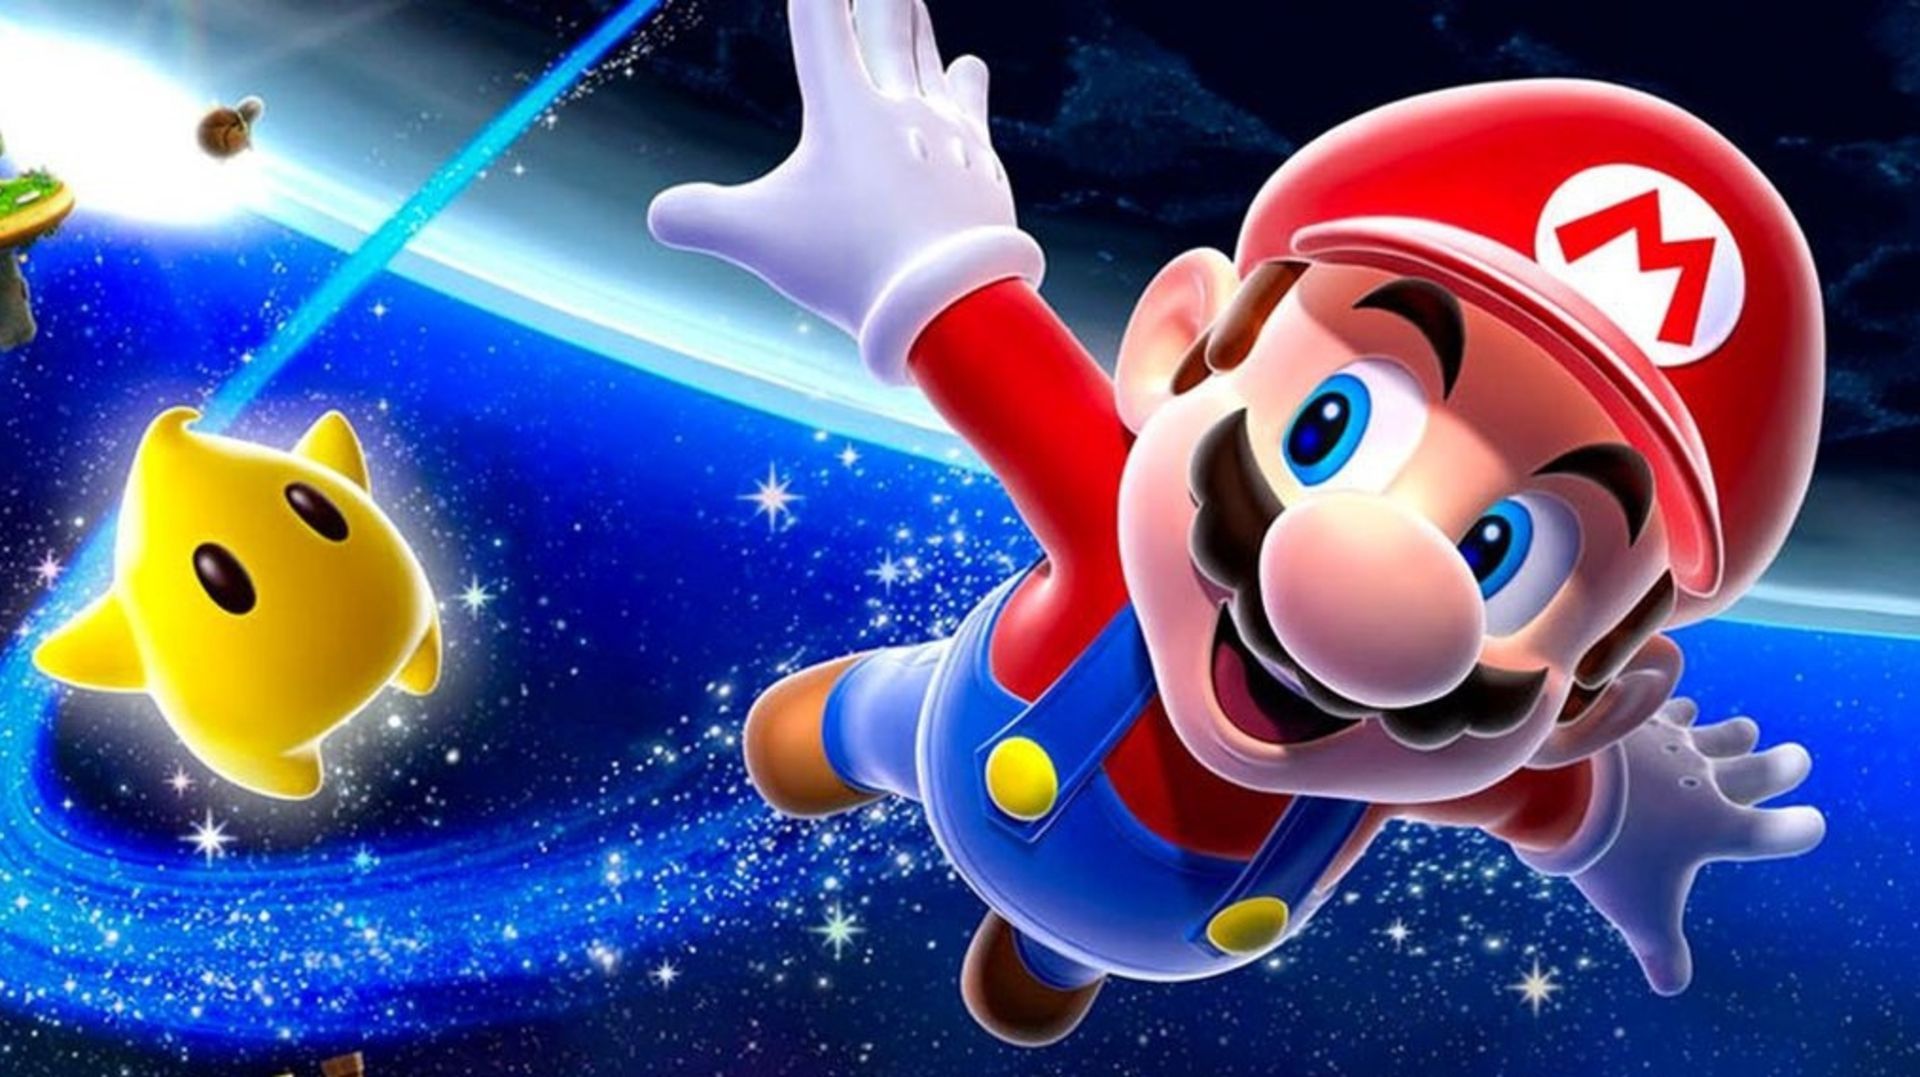 The Super Mario Bros Animated Film Is Coming In 2022, Miyamoto Will Act As Producer